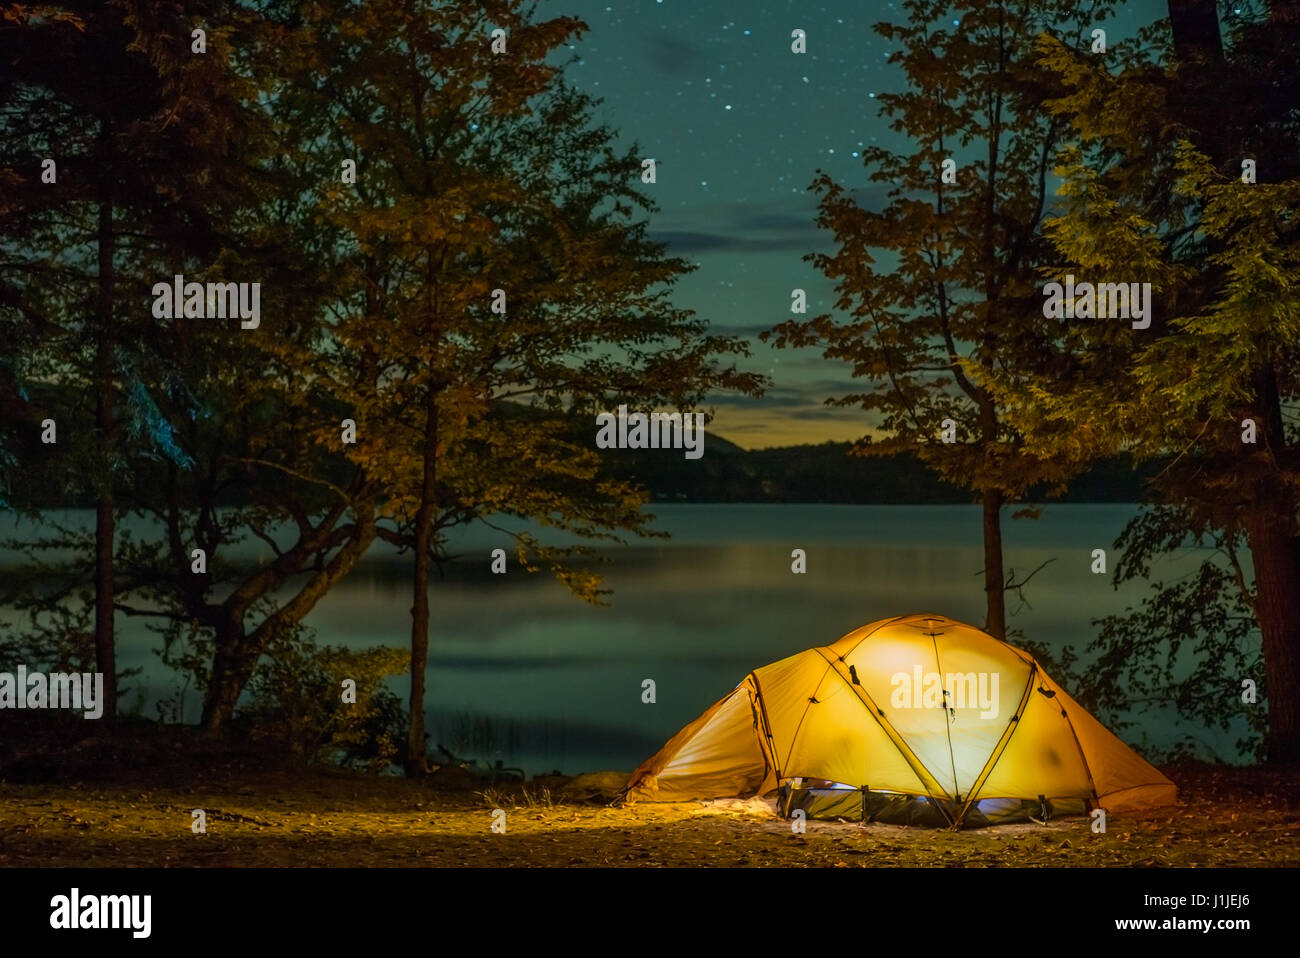 Tent camping in the great outdoors under a starry sky Stock Photo